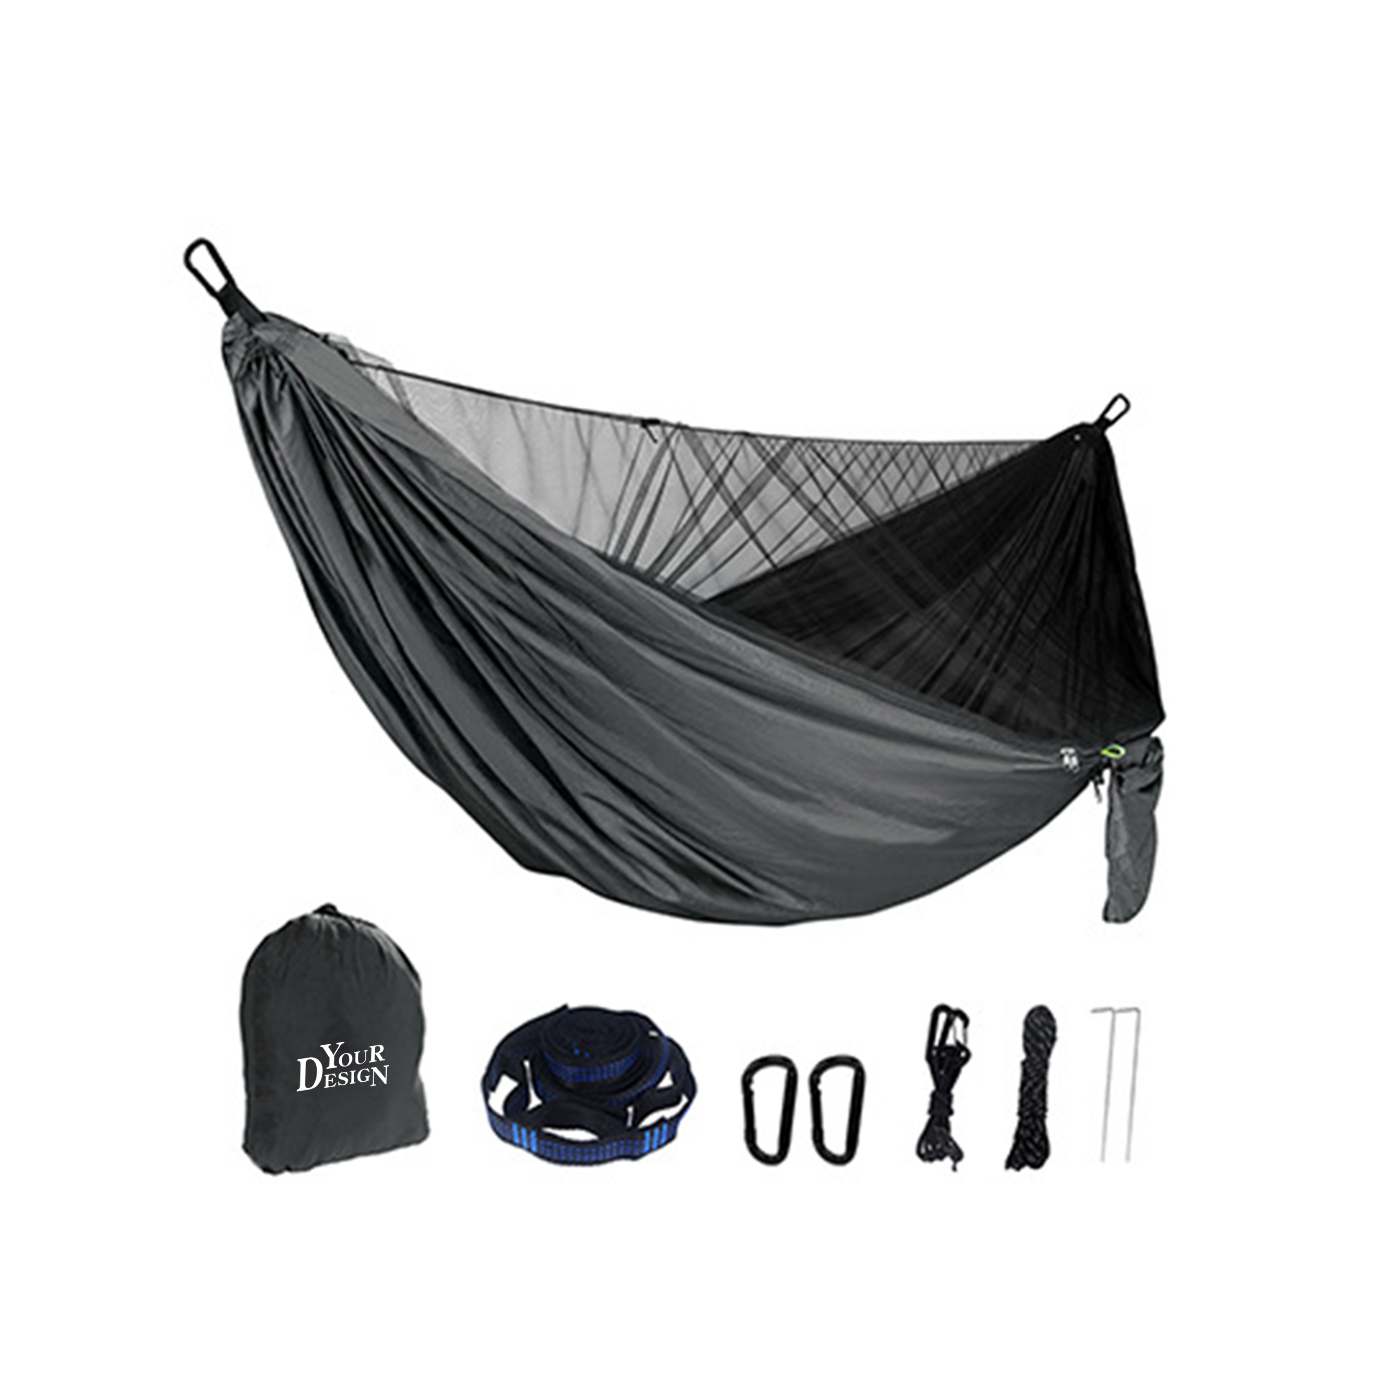 Camping Hammock With Mosquito Net1